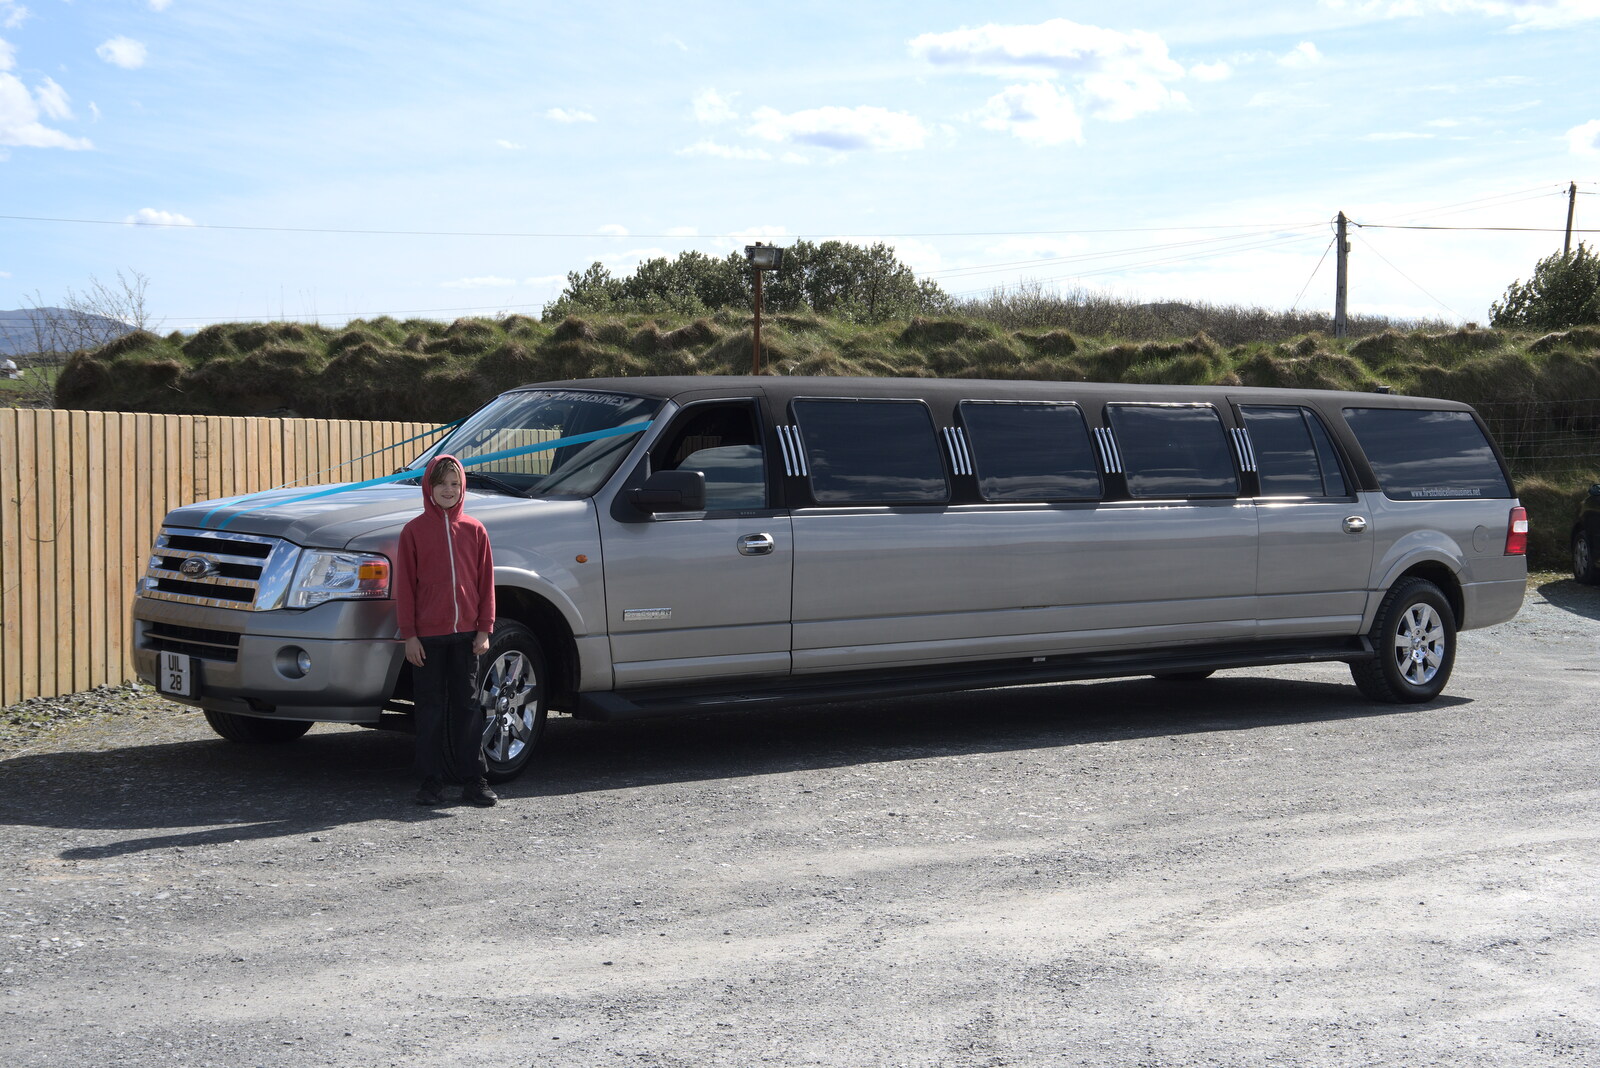 Greencastle, Doagh and Malin Head, County Donegal, Ireland - 19th April 2022: Harry stands next to the stretch limo